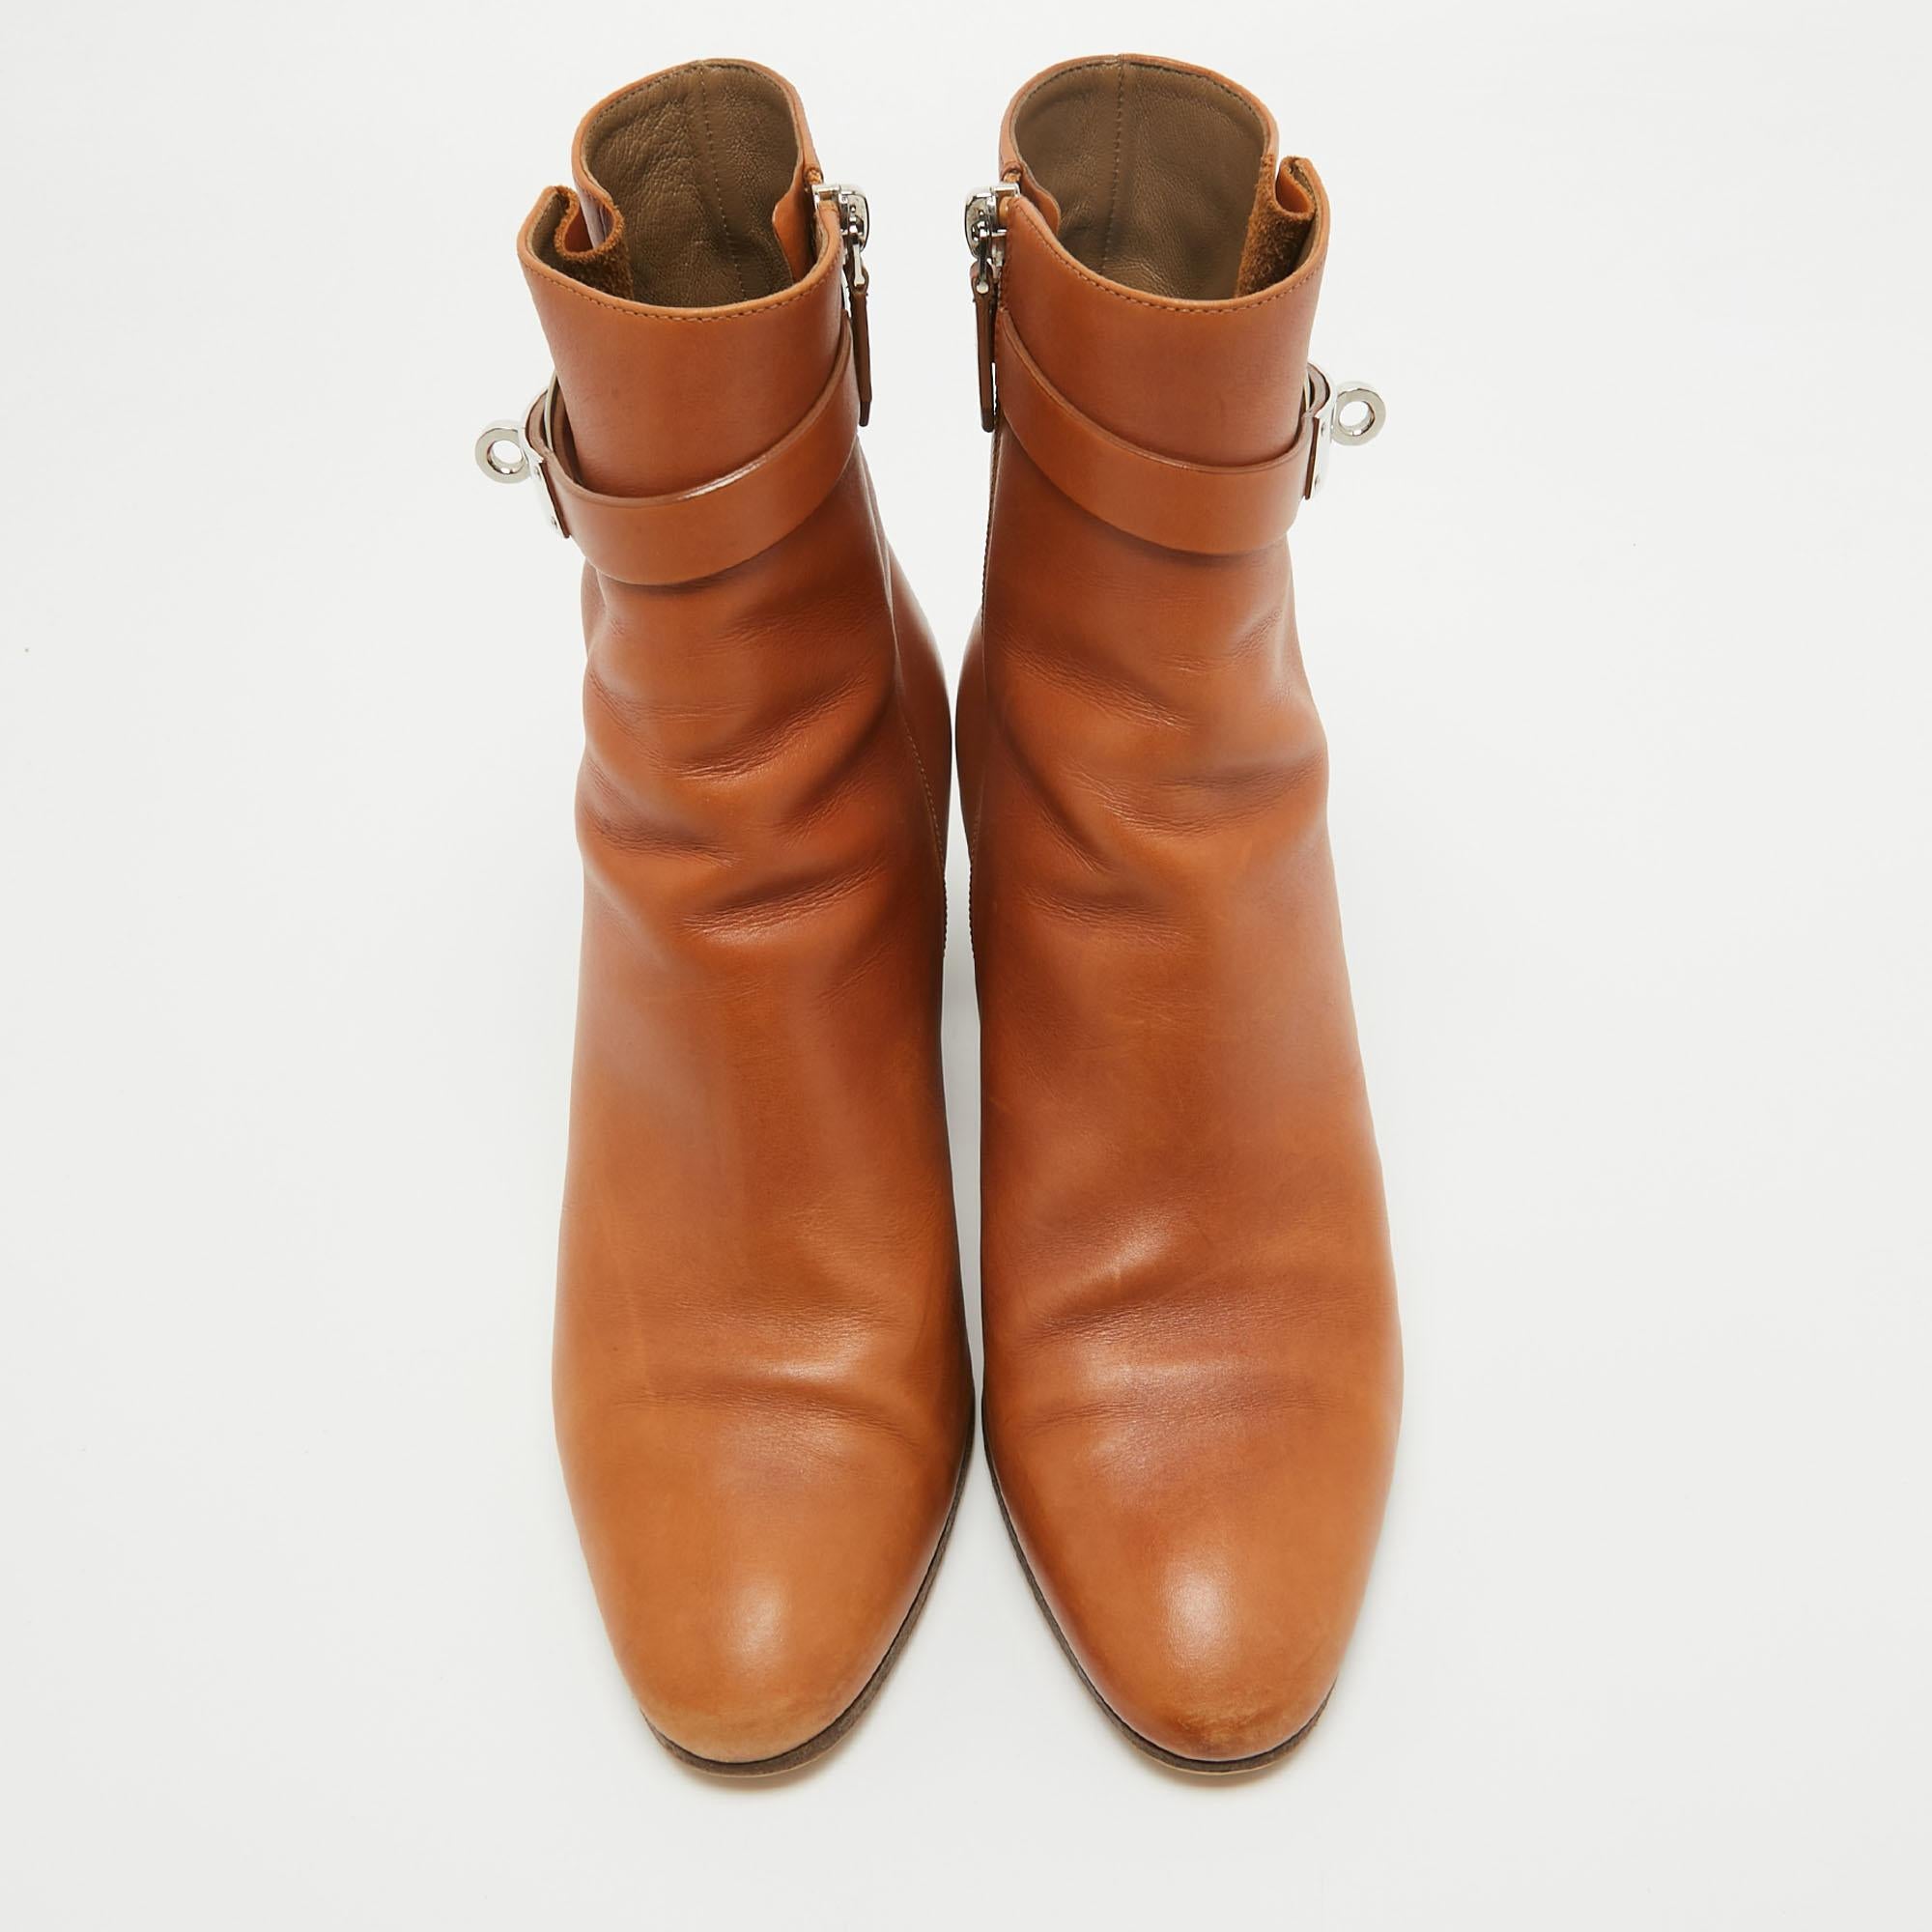 Enjoy the most fashionable days with these stylish Hermes boots. Modern in design and craftsmanship, they are fashioned to keep you comfortable and chic!

Includes
Original Dustbag